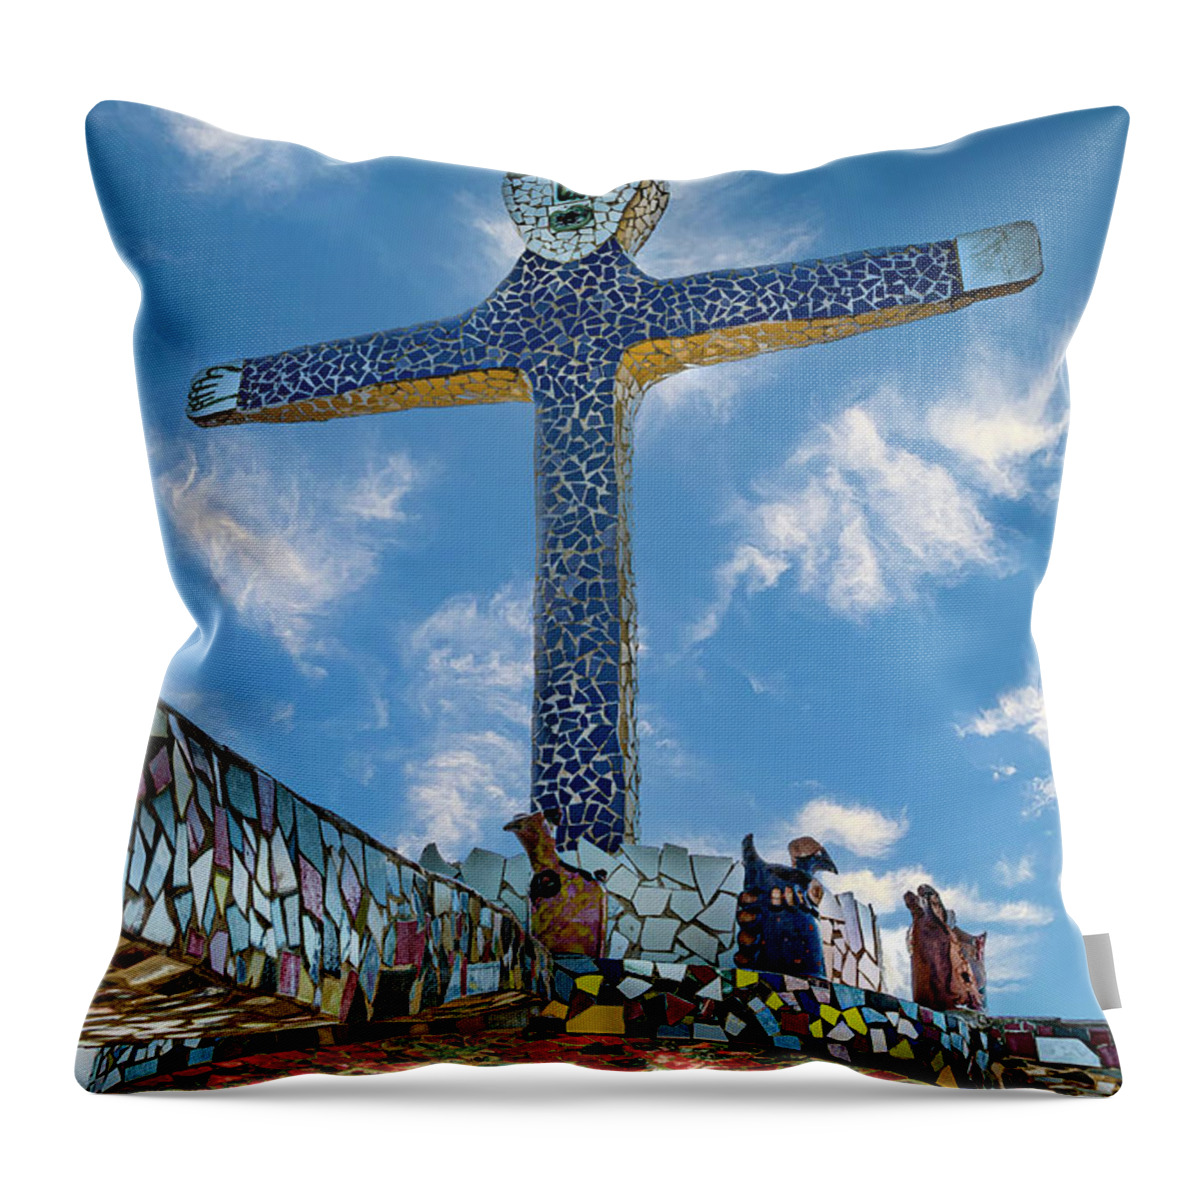 © 2015 Lou Novick All Rights Reversed Throw Pillow featuring the photograph Fusterlandia 2 by Lou Novick